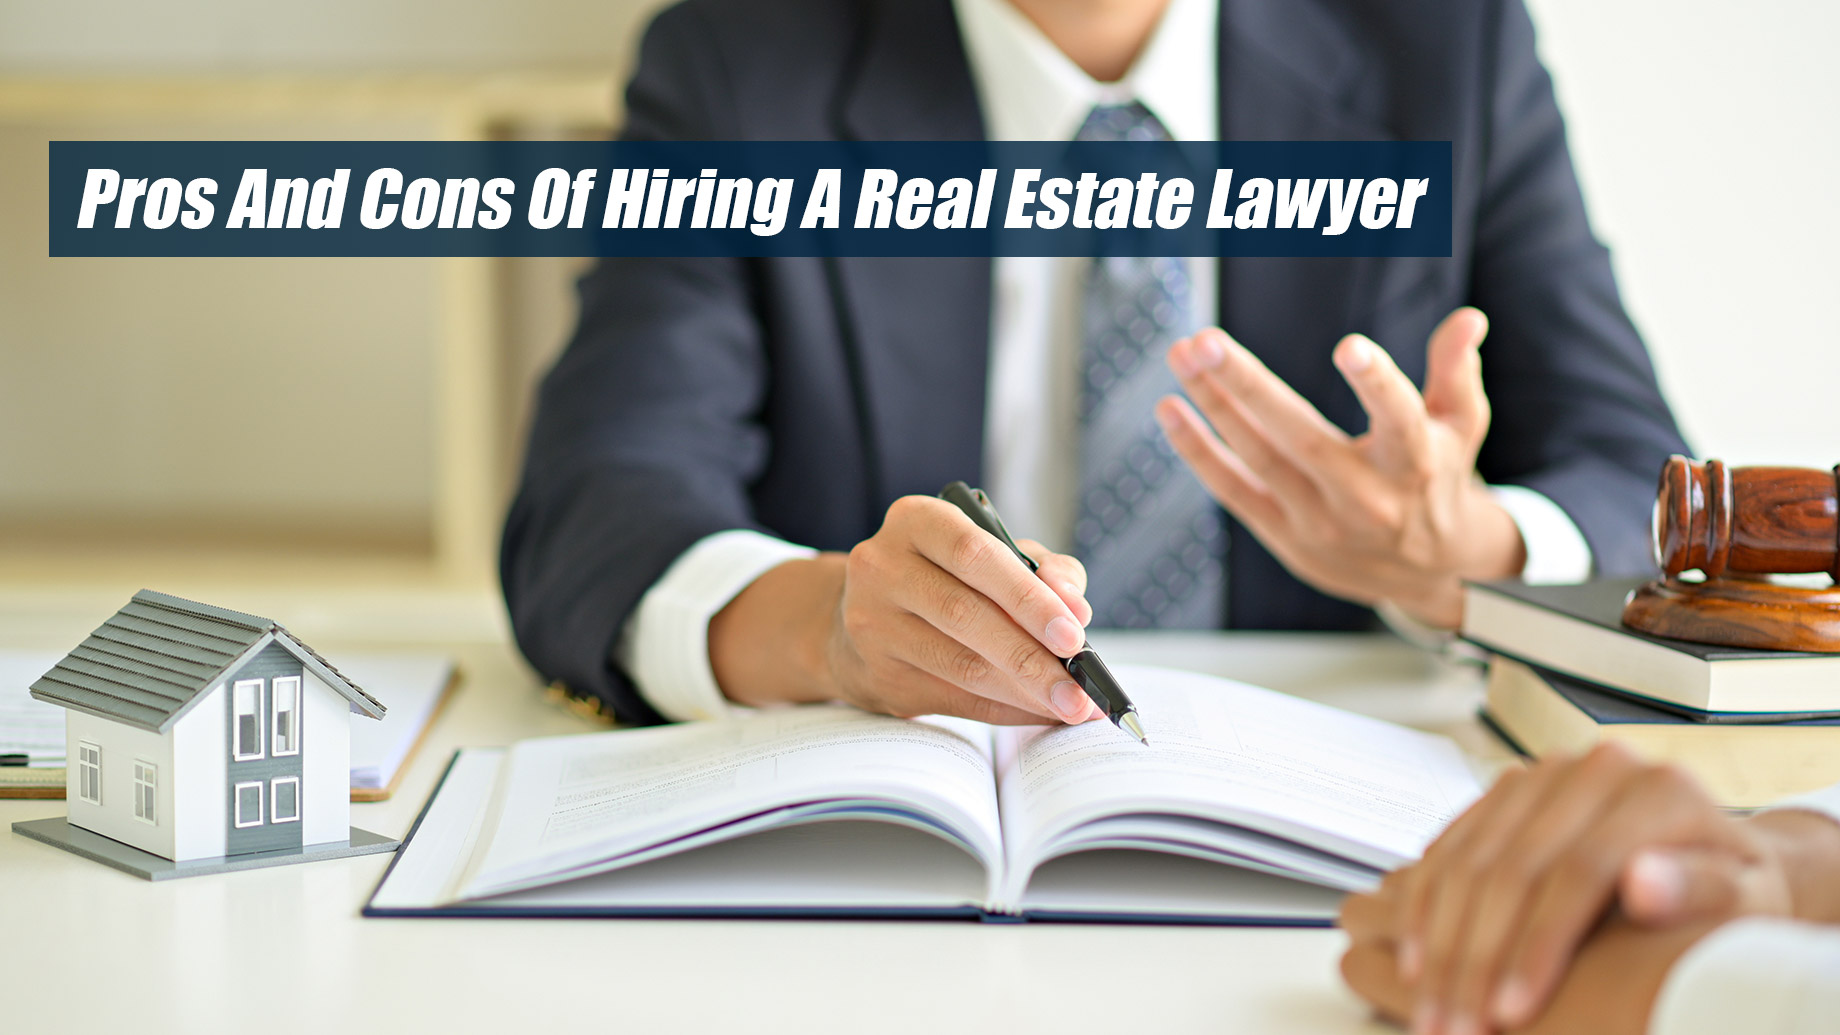 Pros And Cons Of Hiring A Real Estate Lawyer